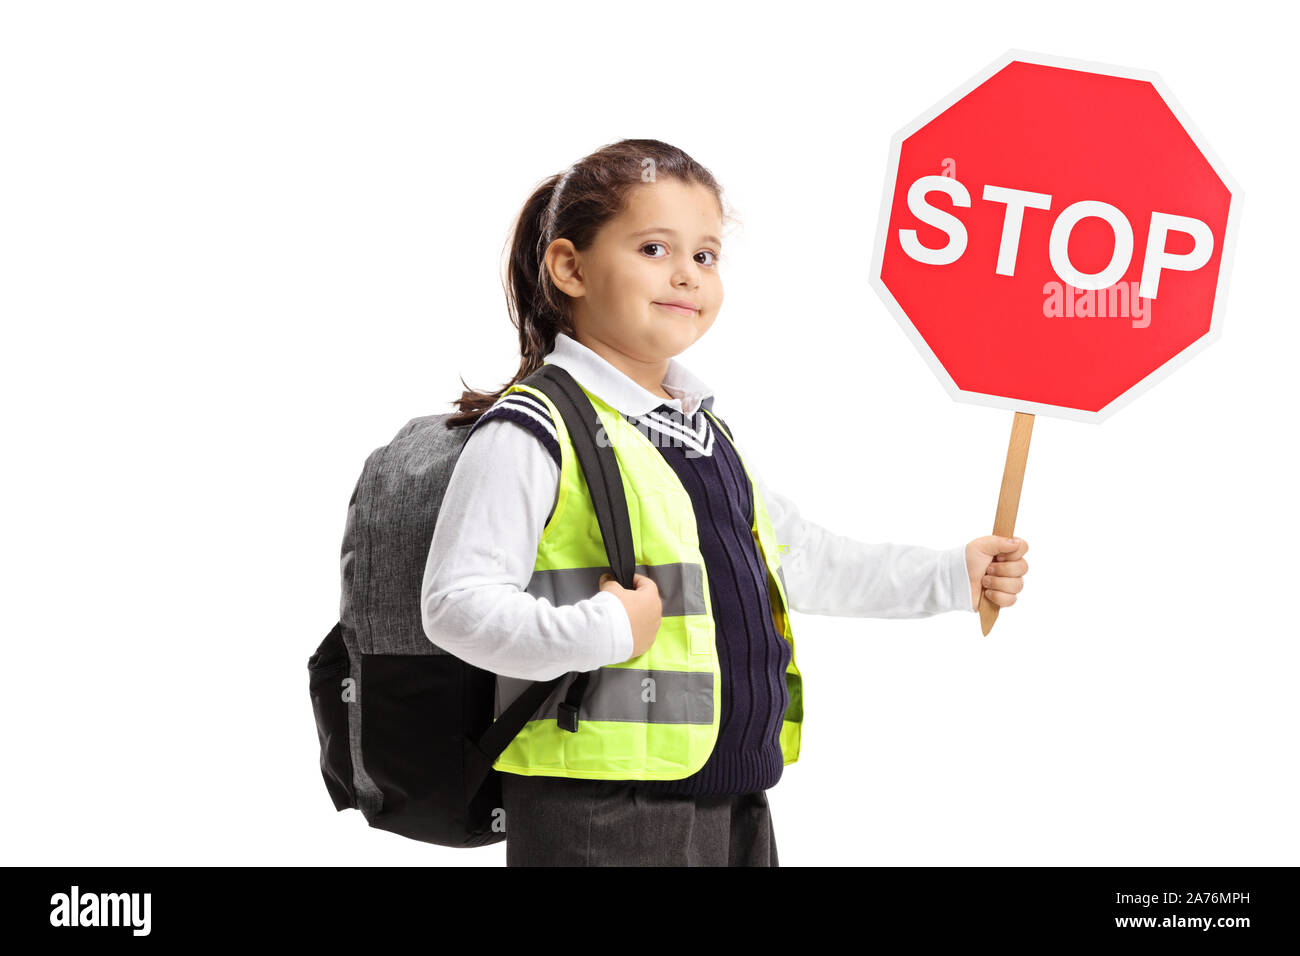 Schoolgirl with a stop sign and wearing a safety vest against white background Stock Photo